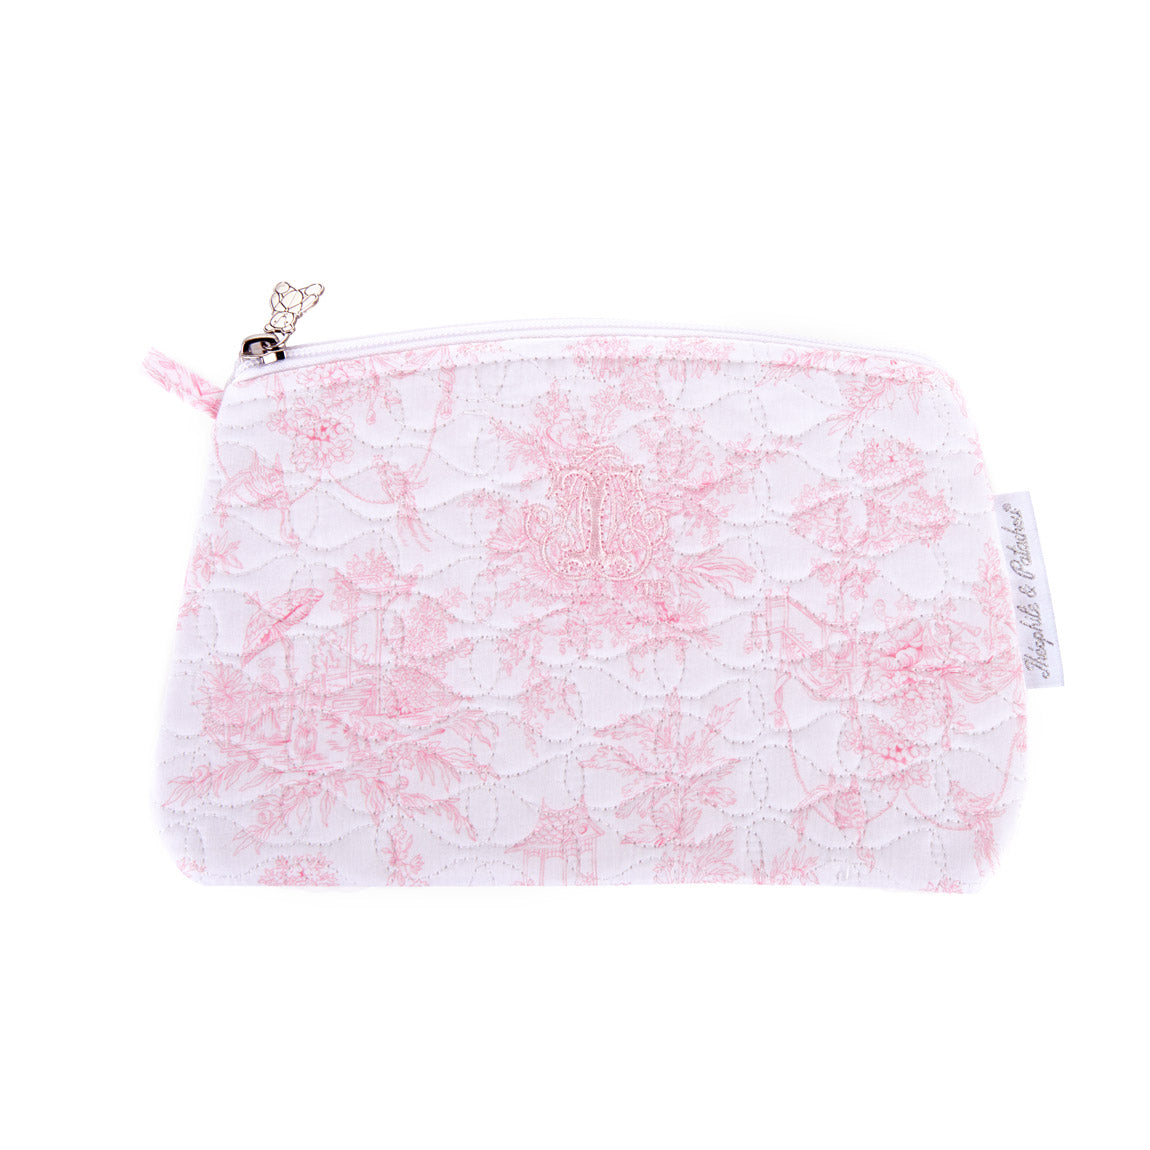 Theophile & Patachou Small Handbag Quilted - Sweet Pink